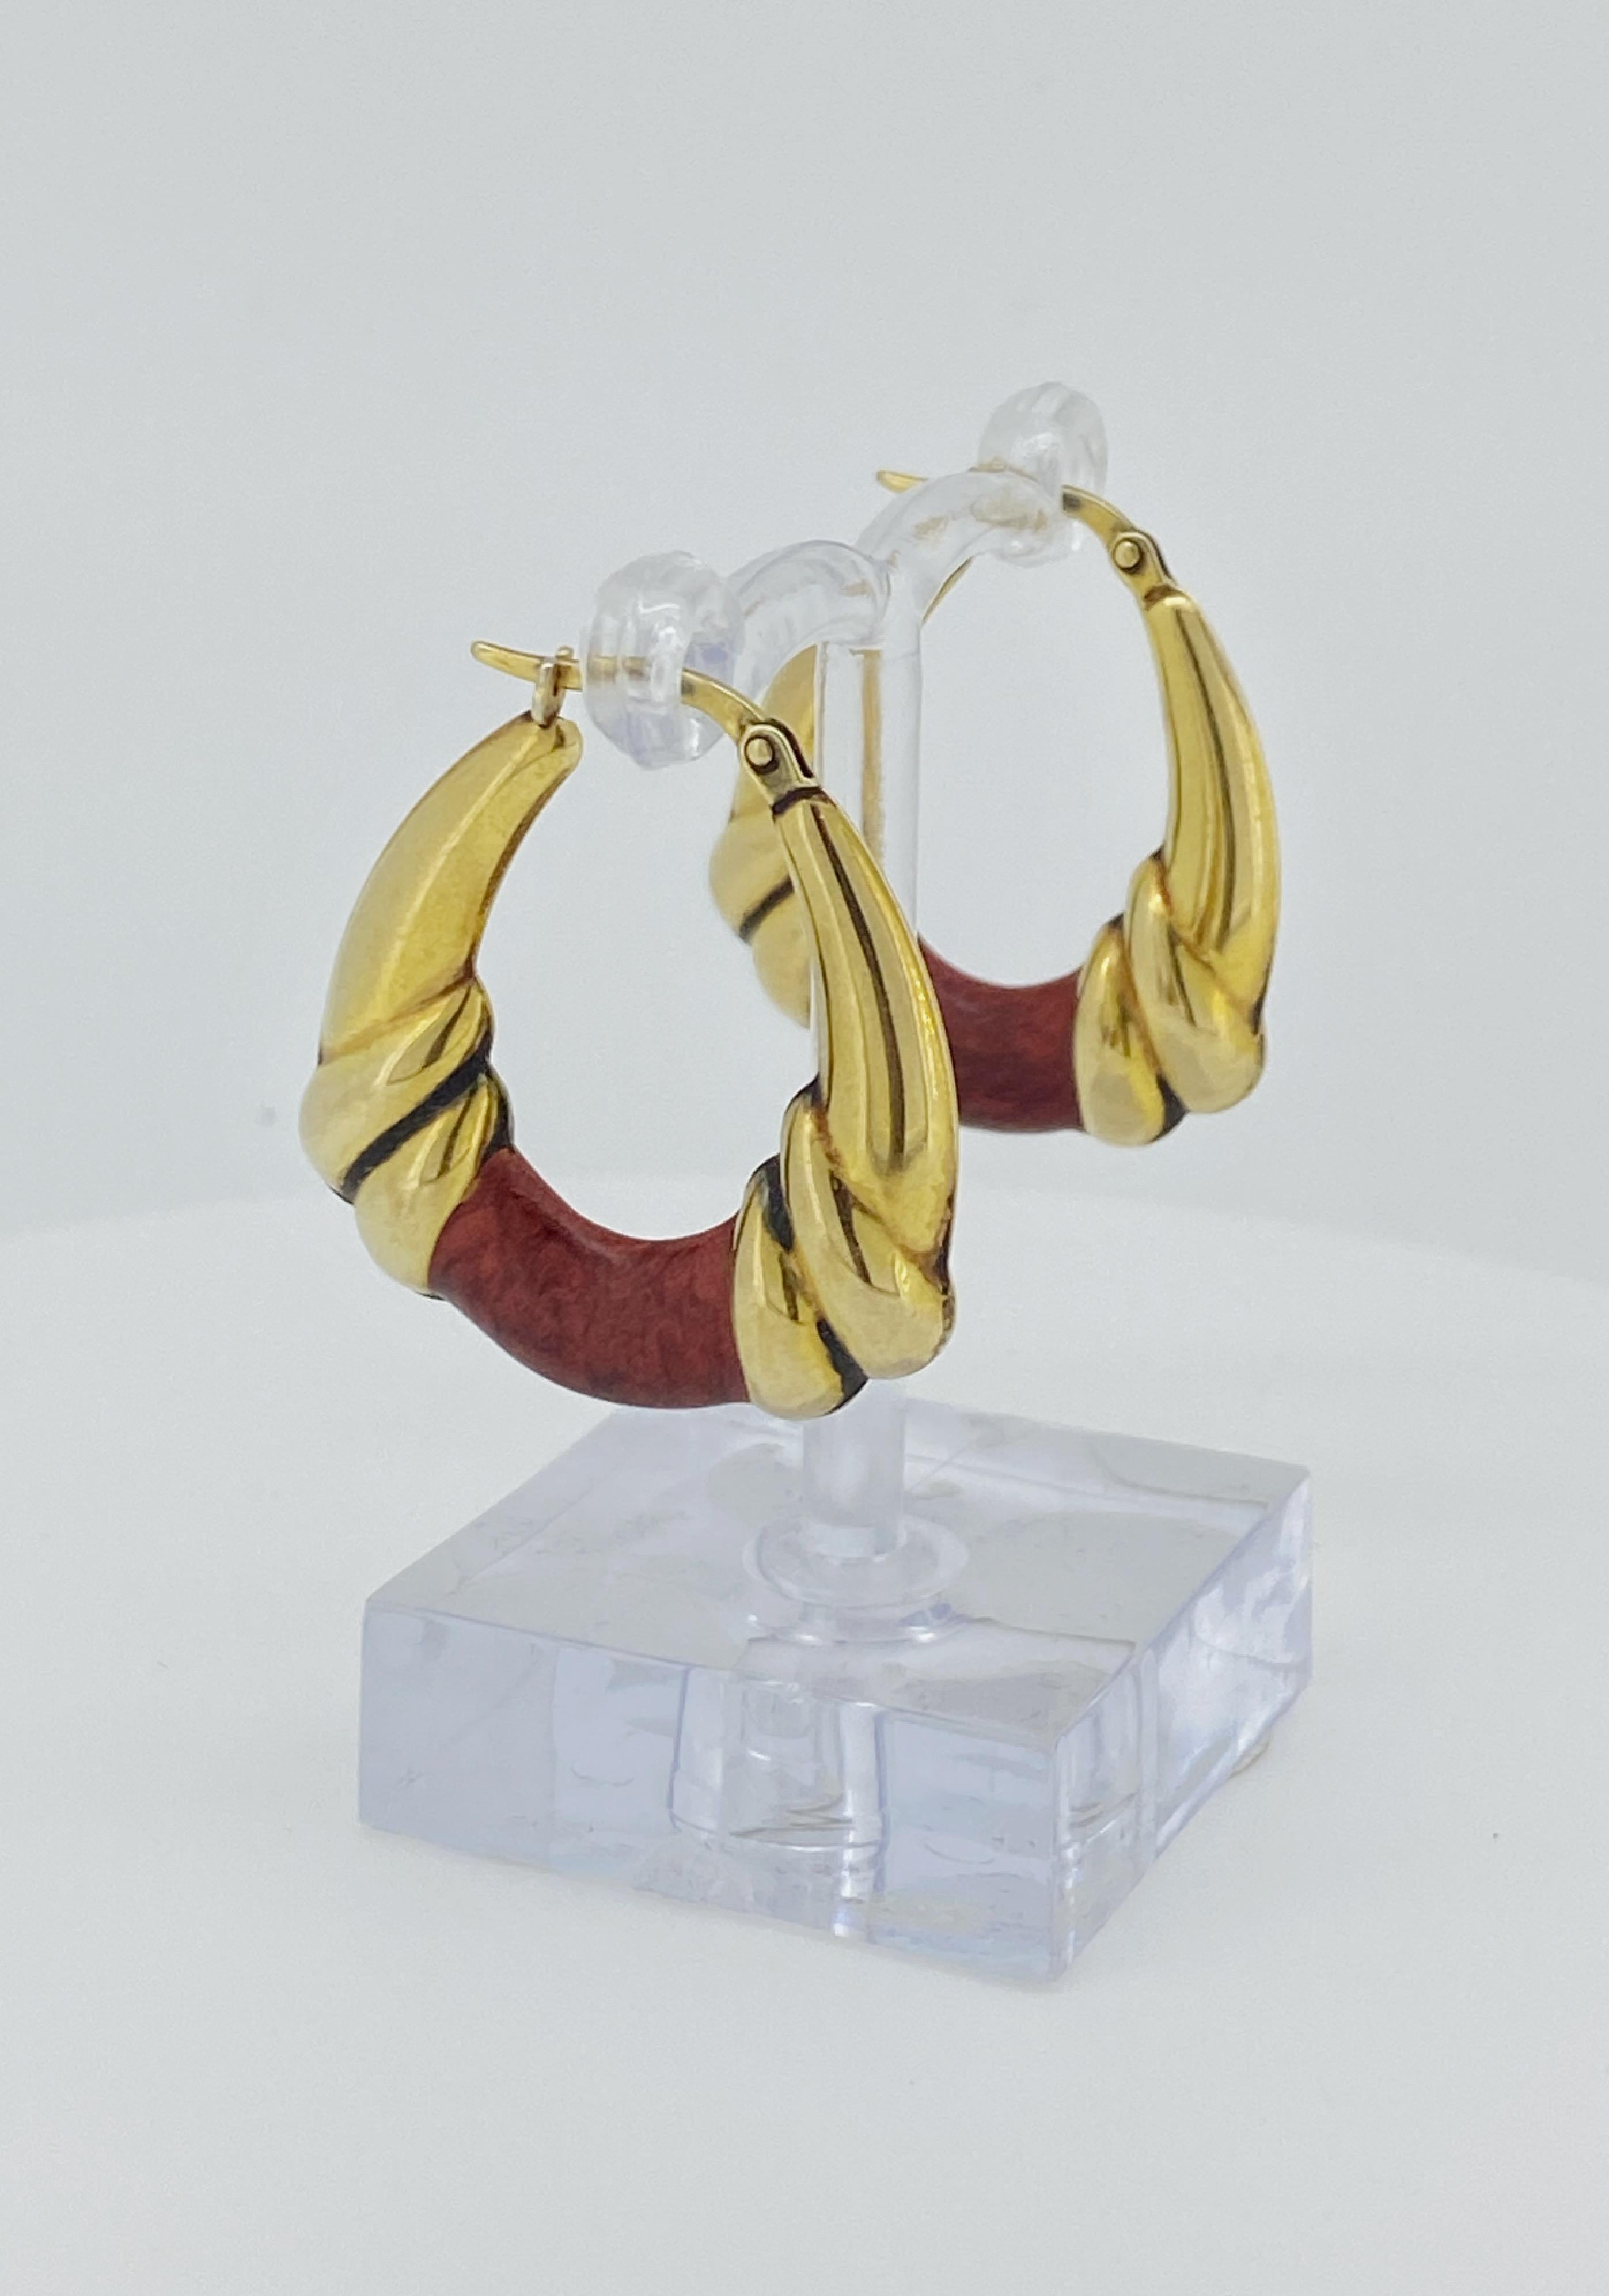 Meticulously crafted in 9K yellow gold, 
featuring contrasting wood-like finish 

of eye-catching & eternally popular half hoop design, 
finely detailed throughout, 
these earrings are by renowned Italian brand UnoAErre 
(established in